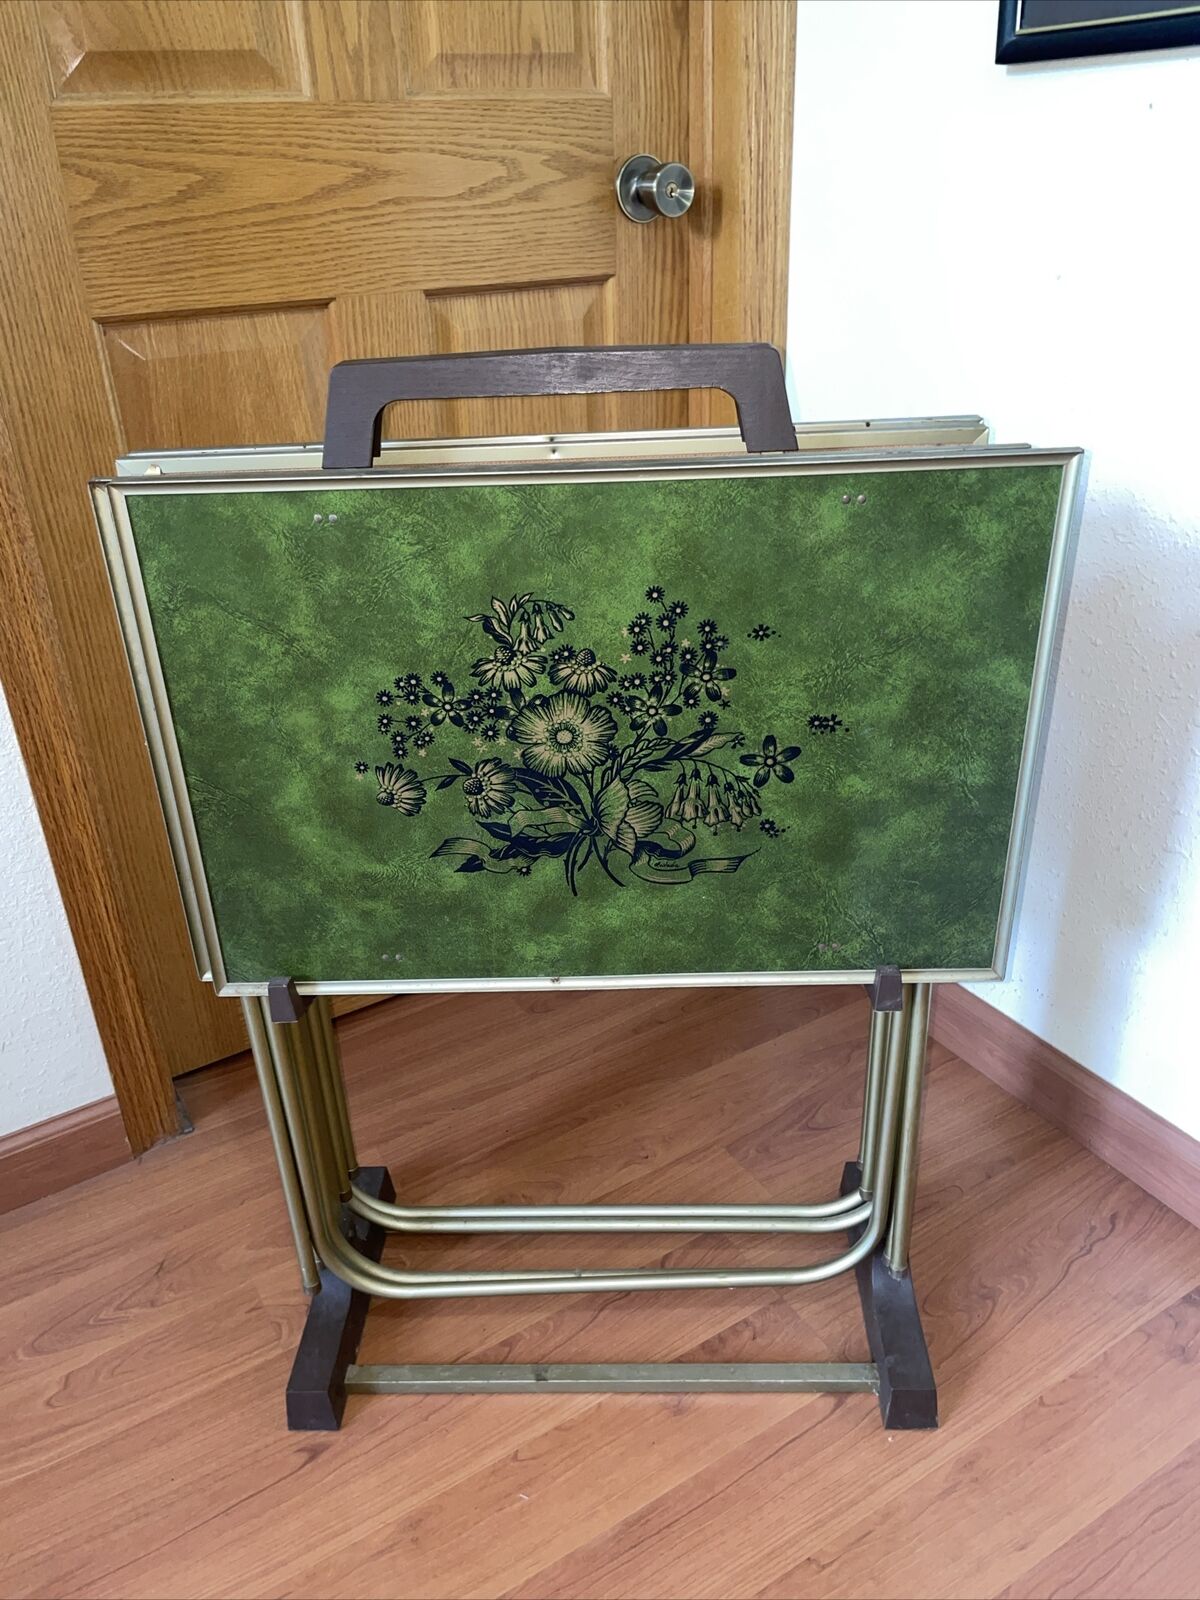 Vintage Lavada TV Trays Set of 4 With Stand Floral Design Avocado Green Nice 24”